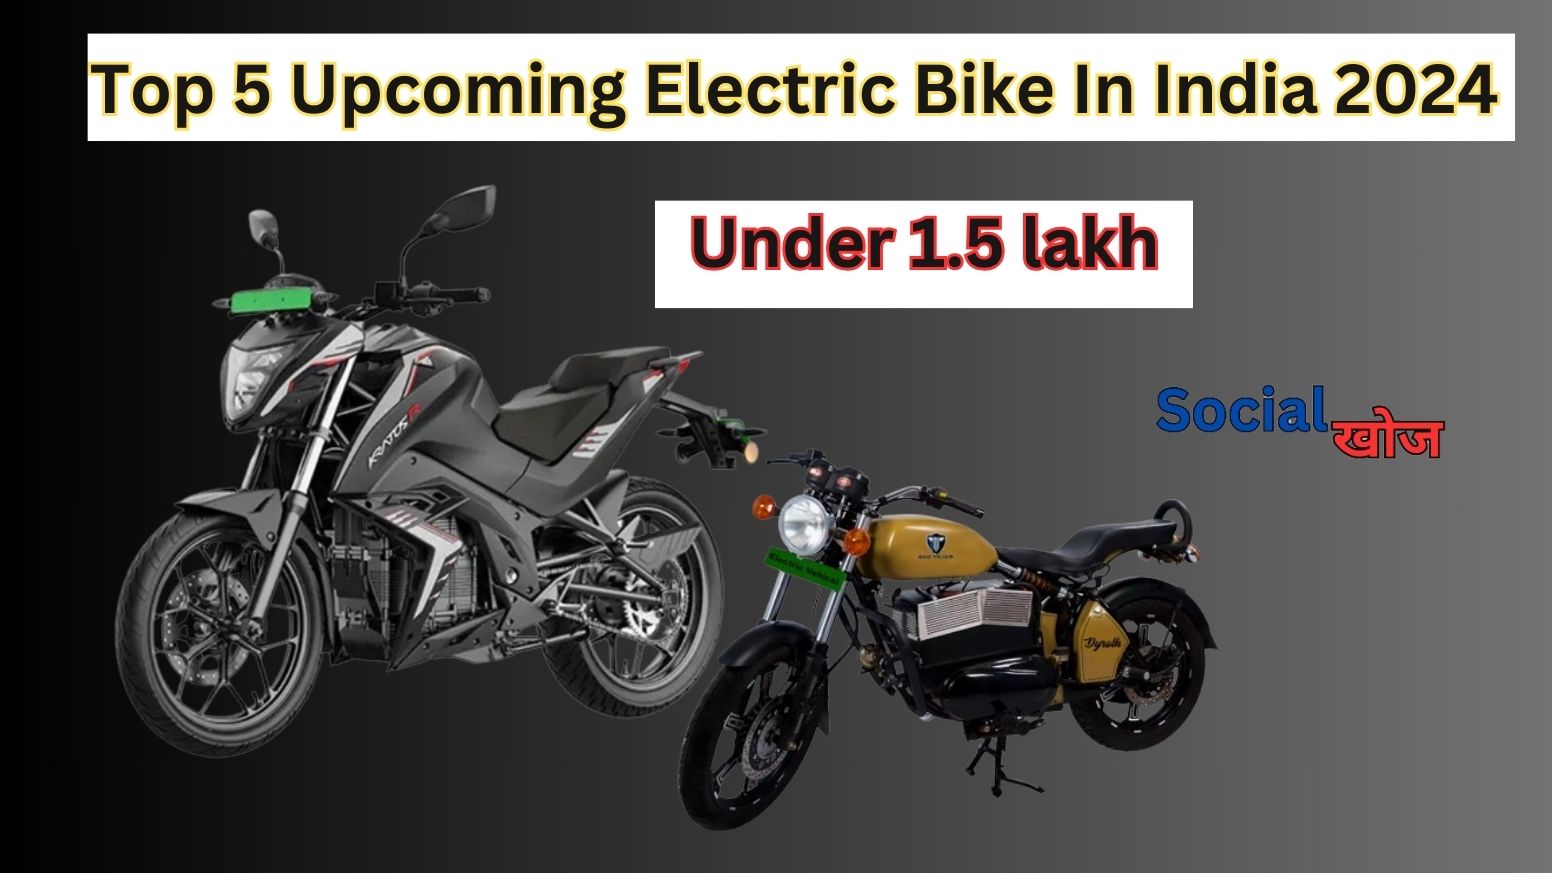 Top 5 upcoming electric bike in india 2024 under 1.5 lakh